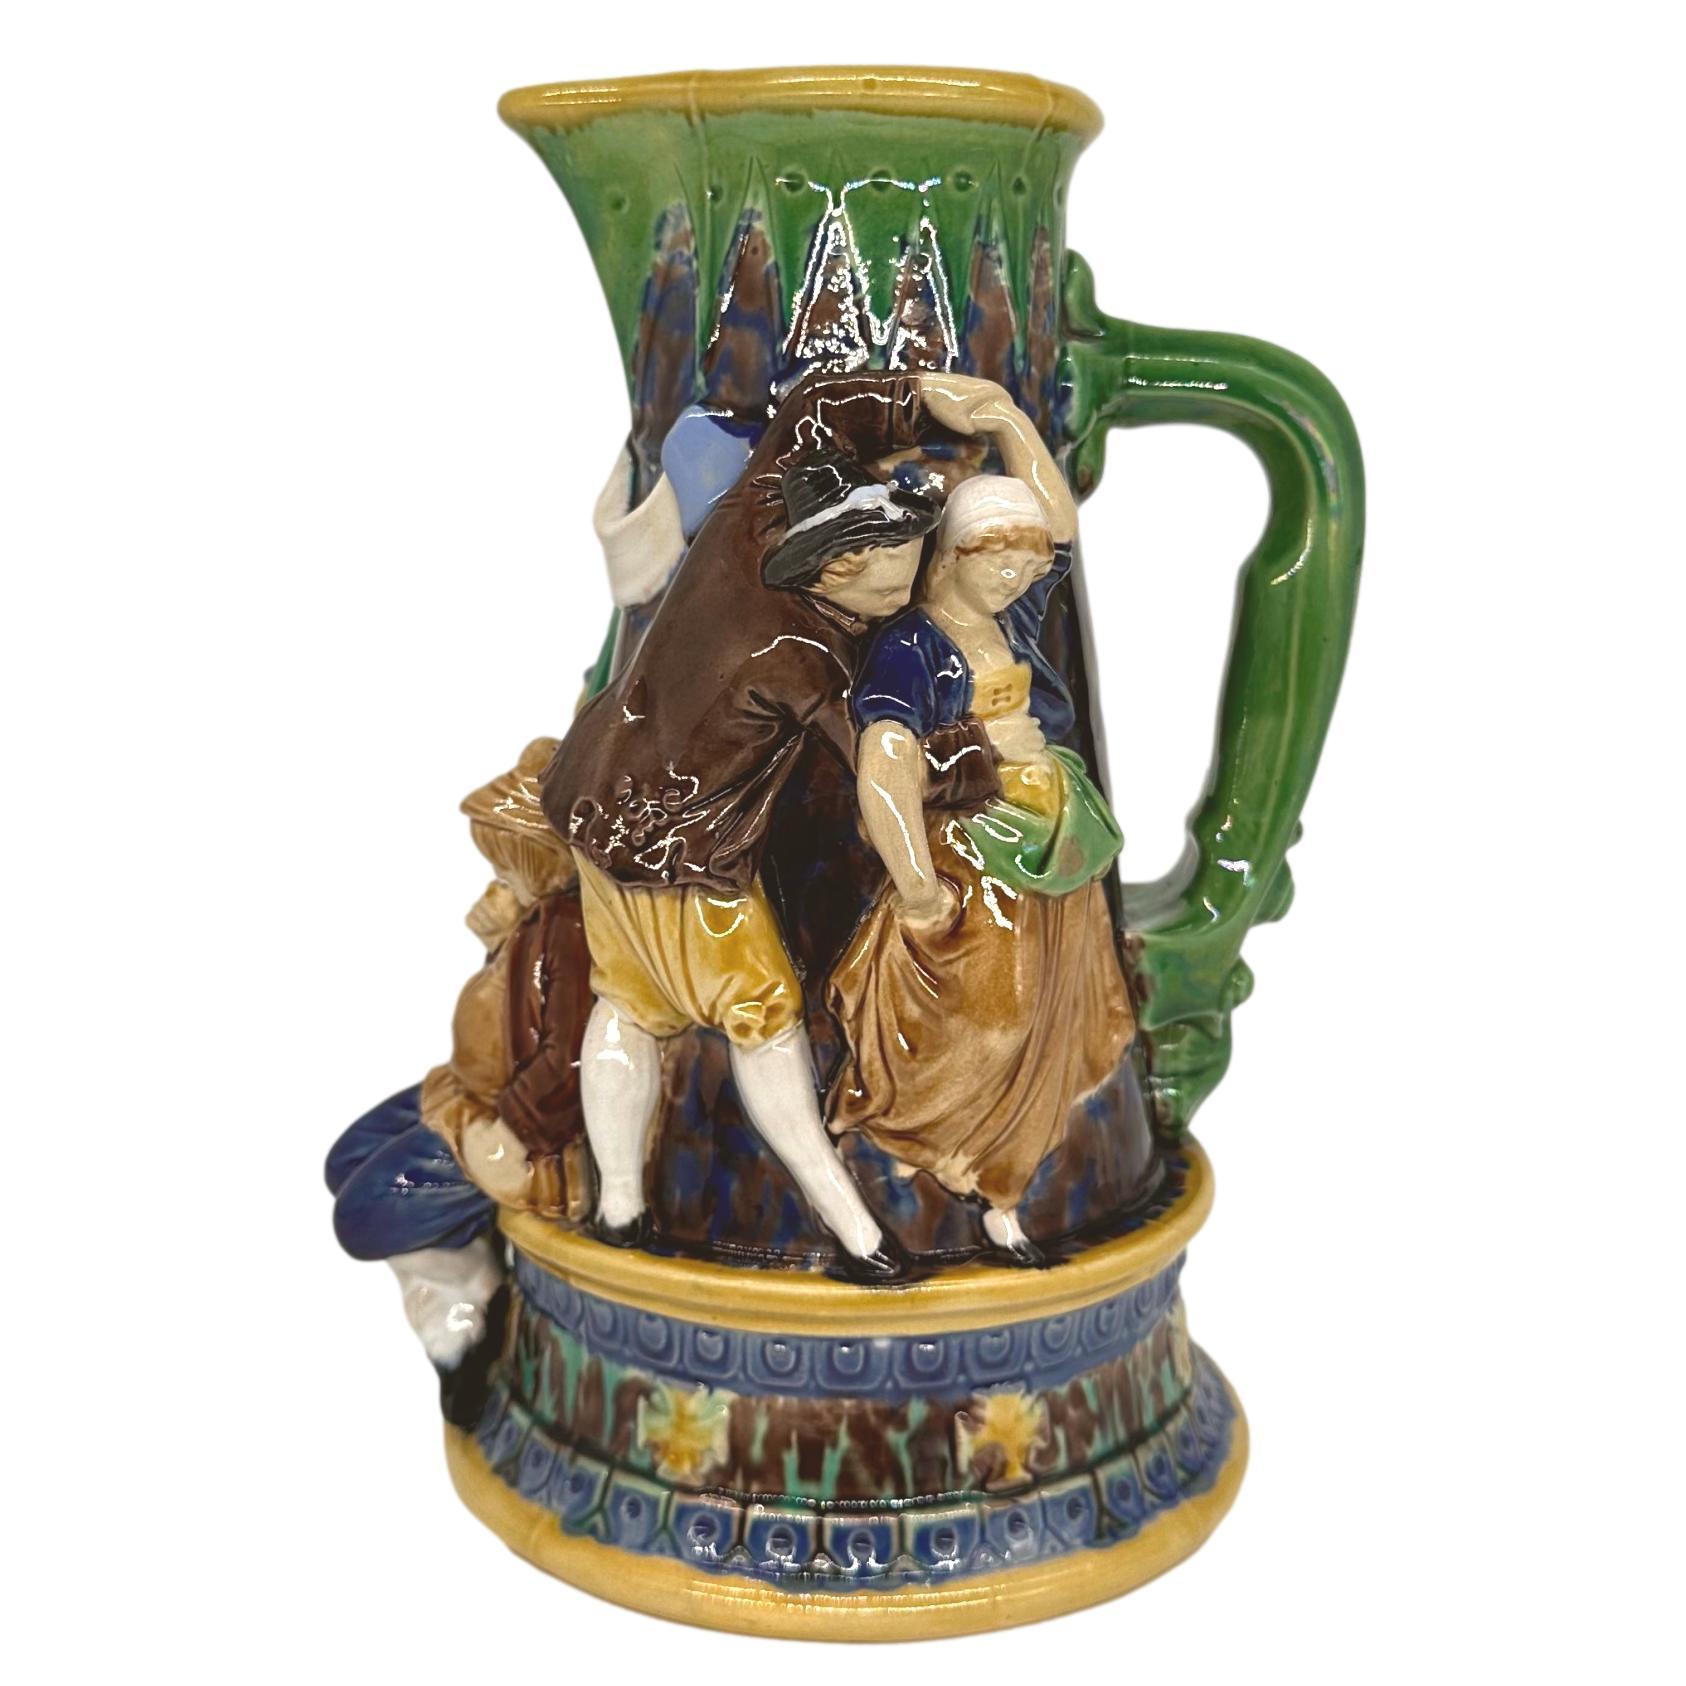 English A Minton Majolica Ale Jug with Five Revelers in Medieval Dress, dated 1862 For Sale